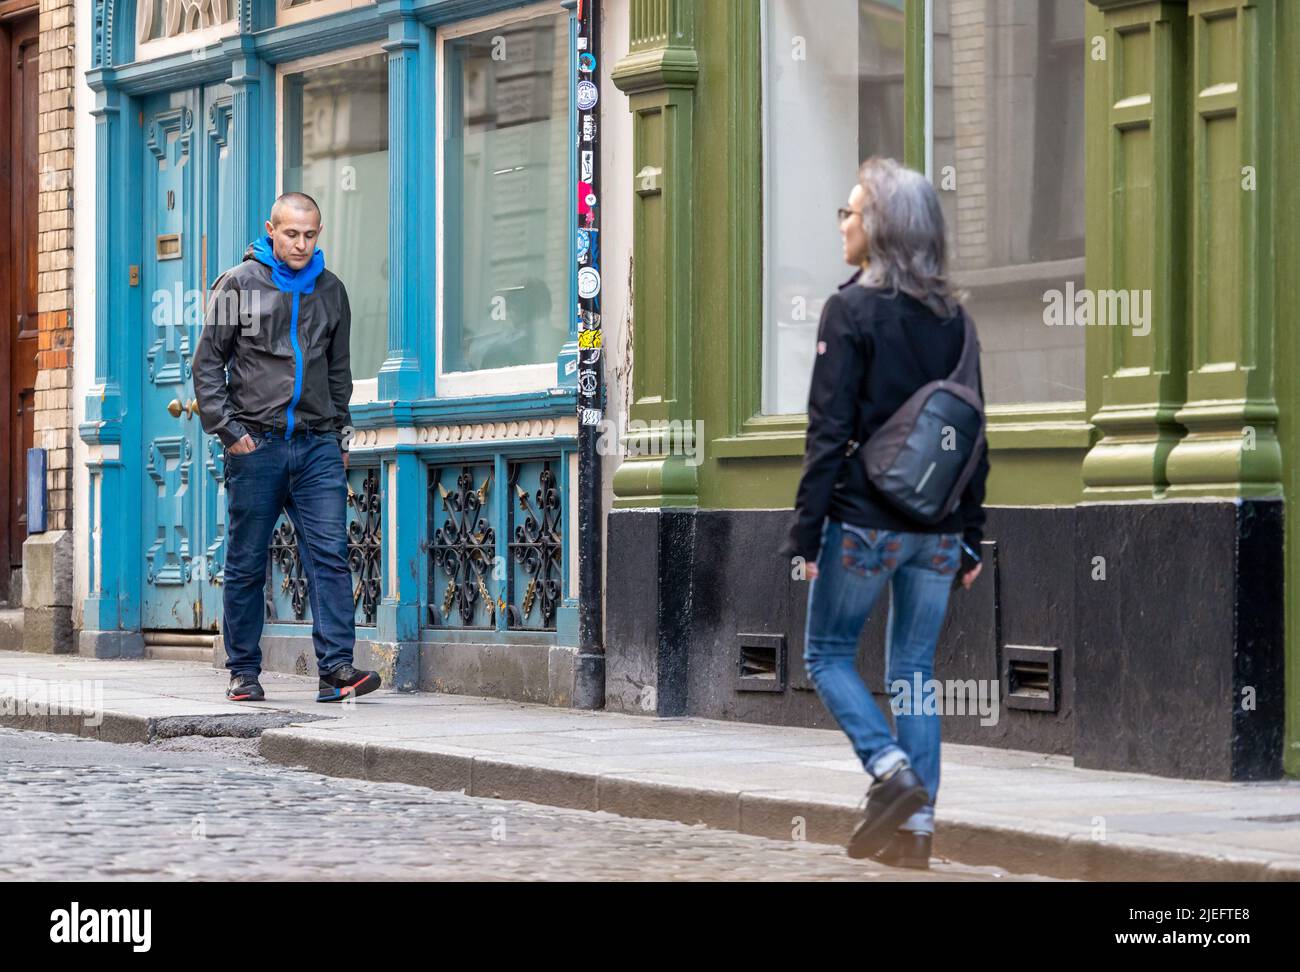 Dublin, Ireland - June 3, 2022: Everyday busy life of tourists and townspeople in Dublin, Ireland. Strangers in Temple Bar. Stock Photo